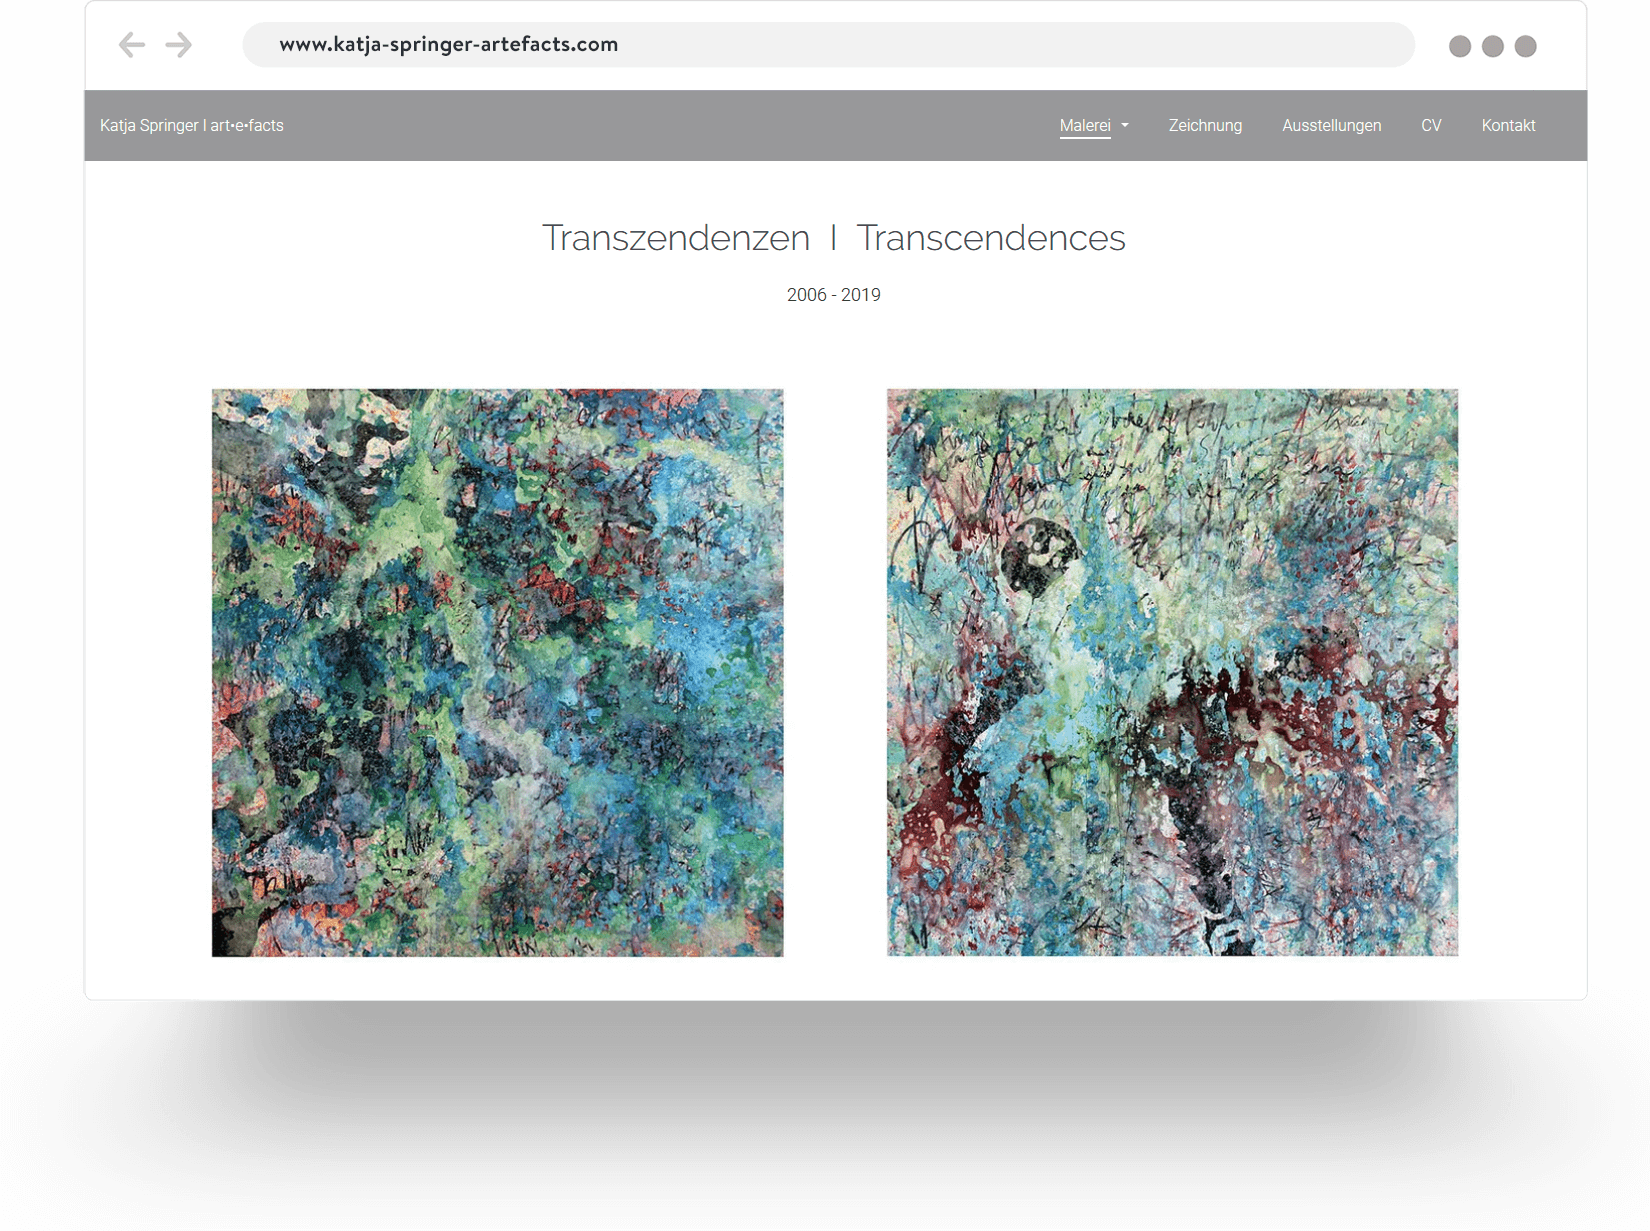 Example of an artist website built with Jimdo showing images of two abstract paintings